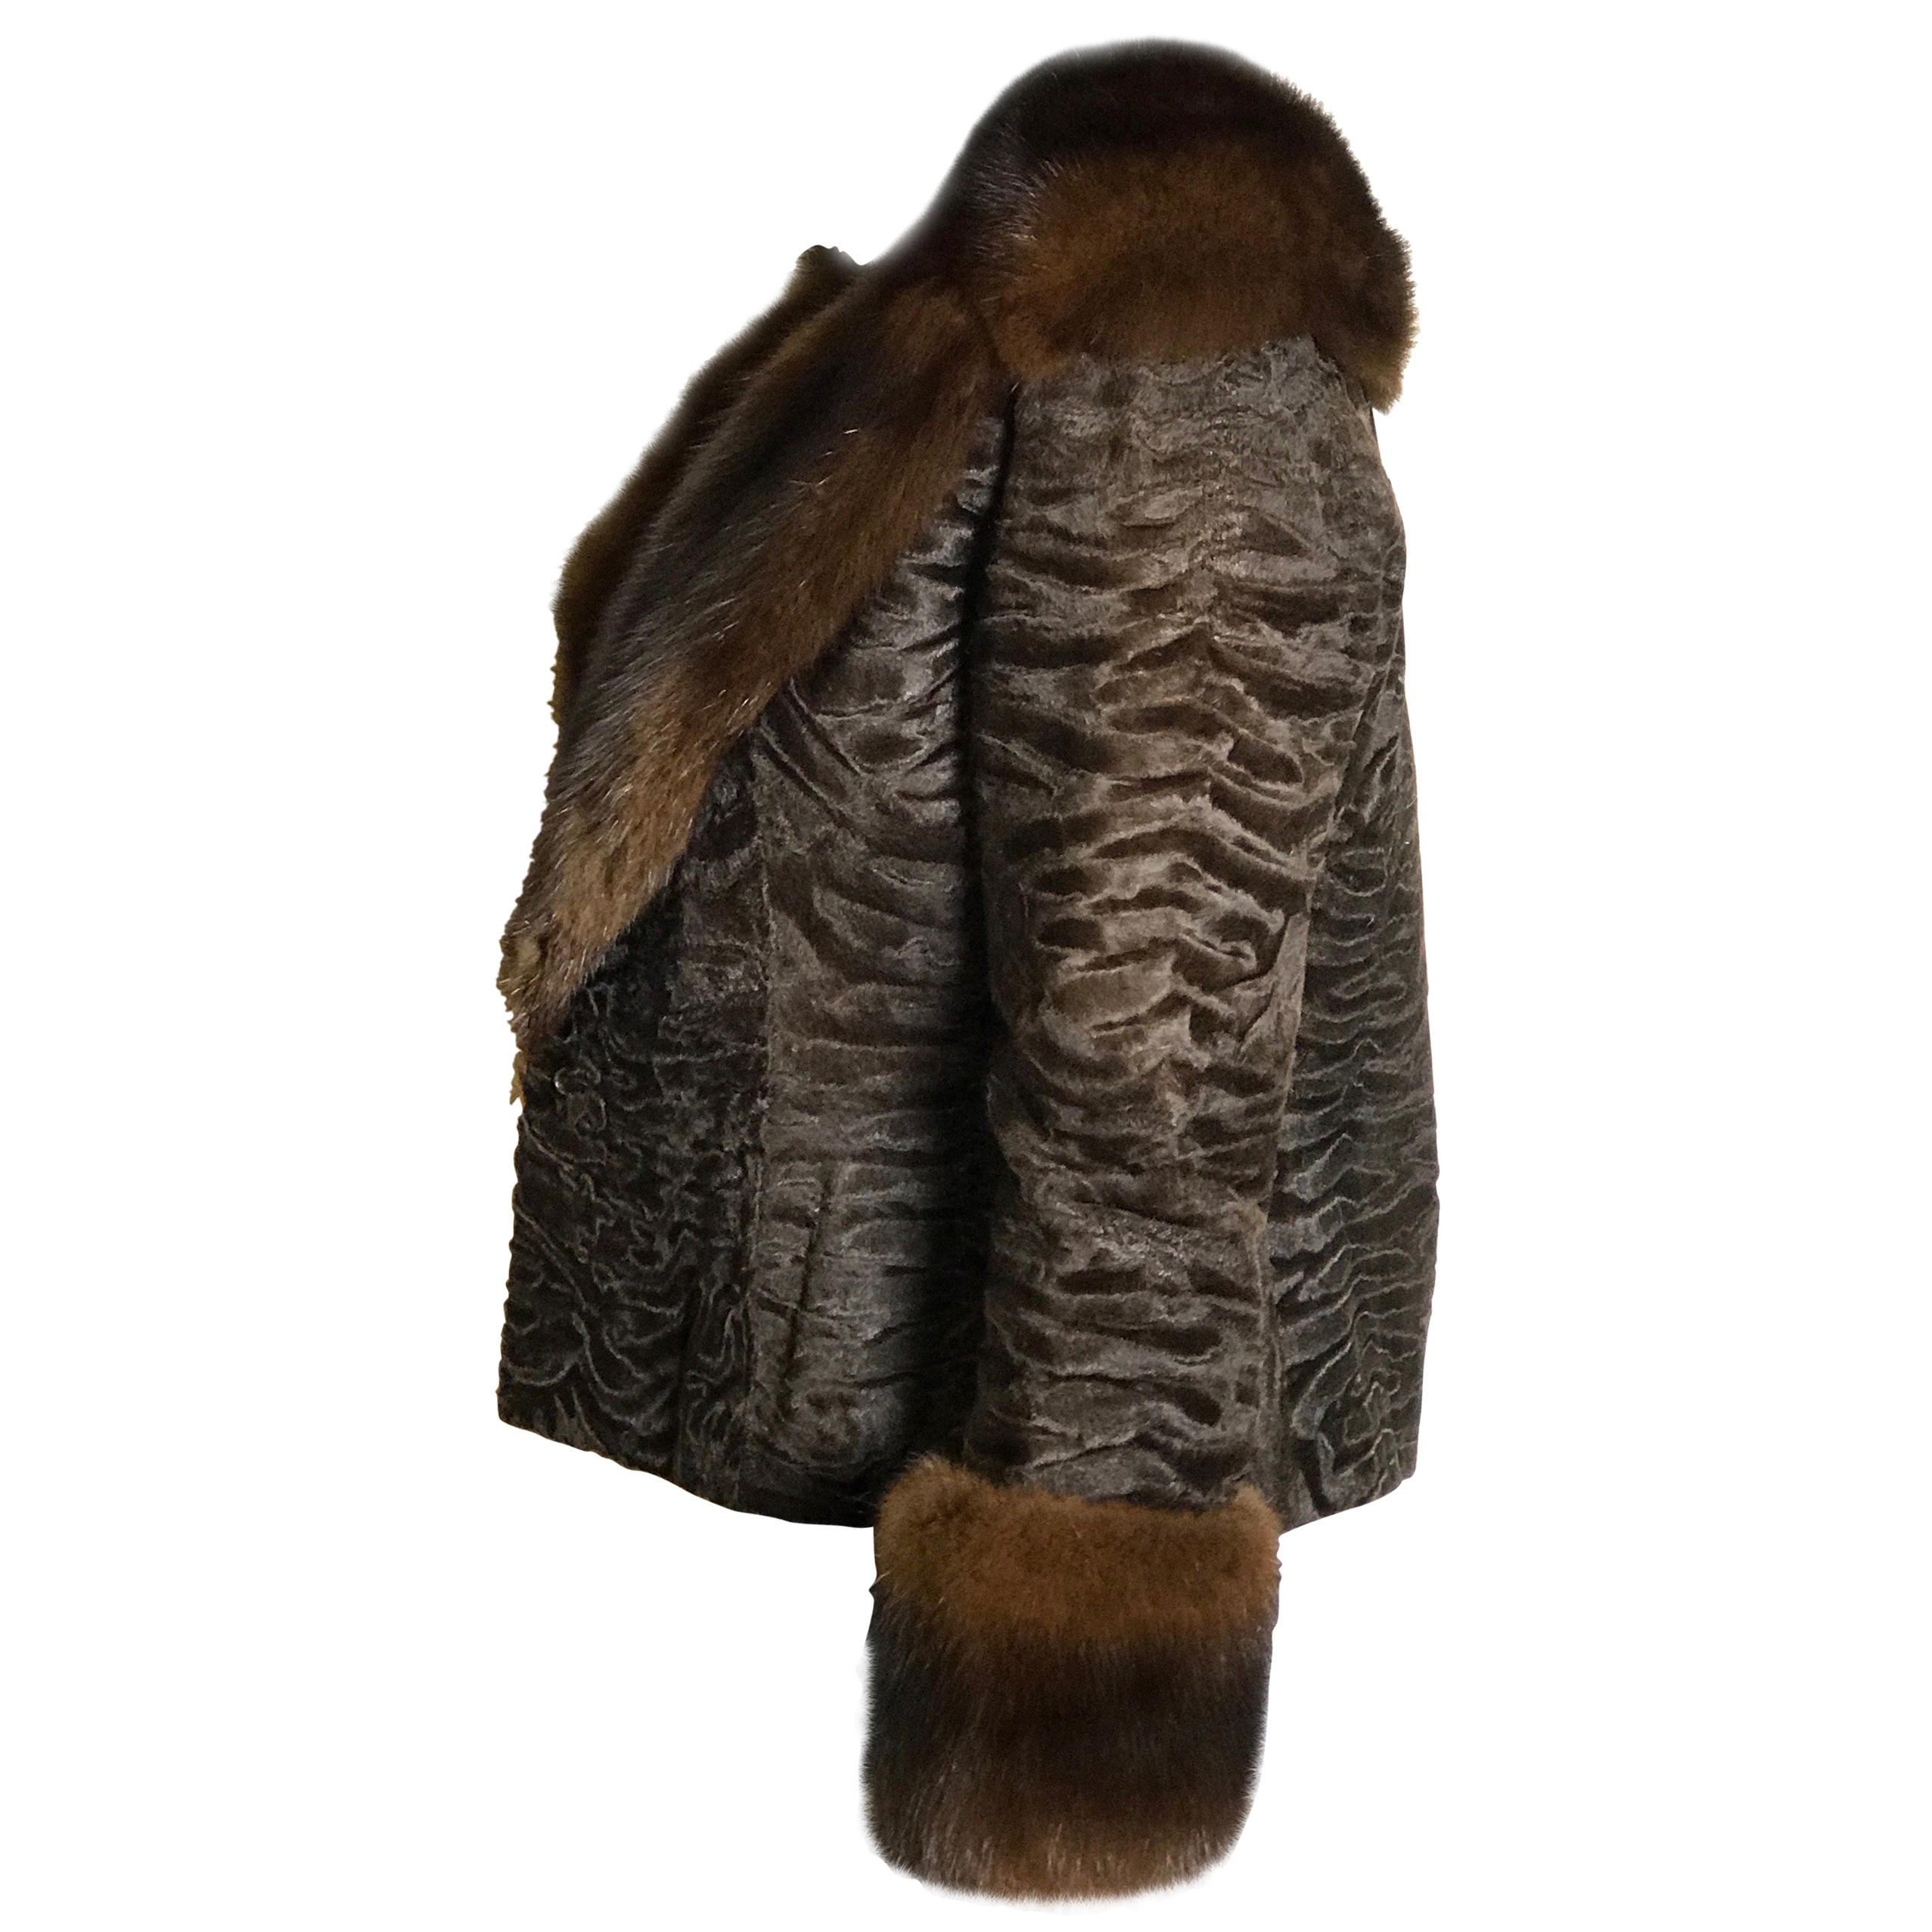  Broad-tailed Persians fur ladies jacket/bolero with sable. Evening jacket. (18) For Sale